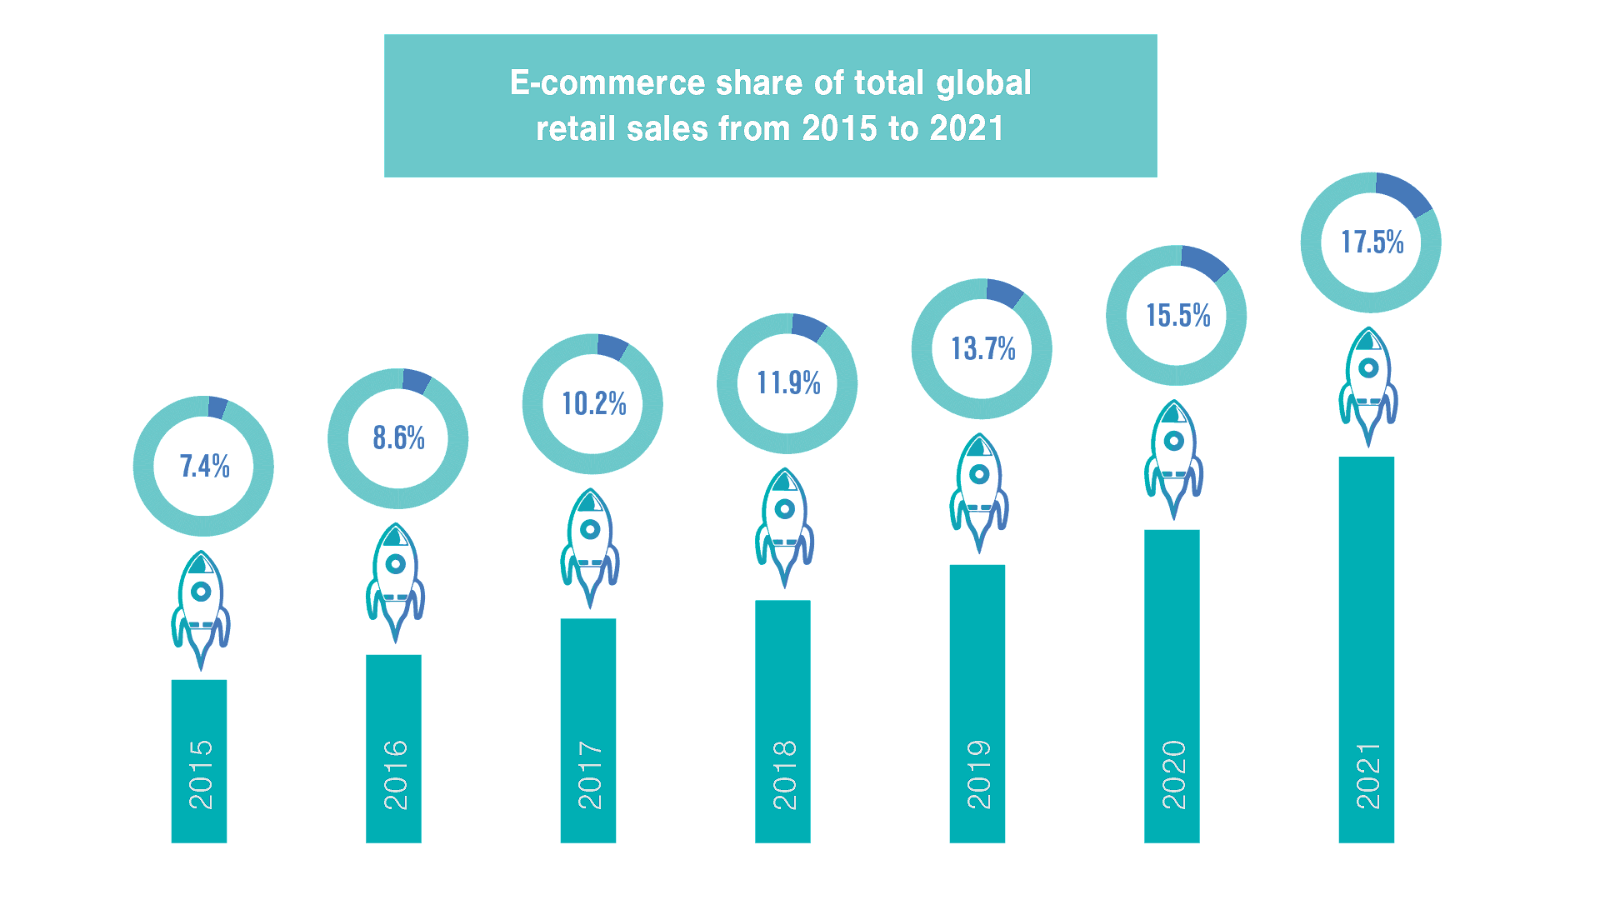 E-commerce share of total global retail sales from 2015 to 2021